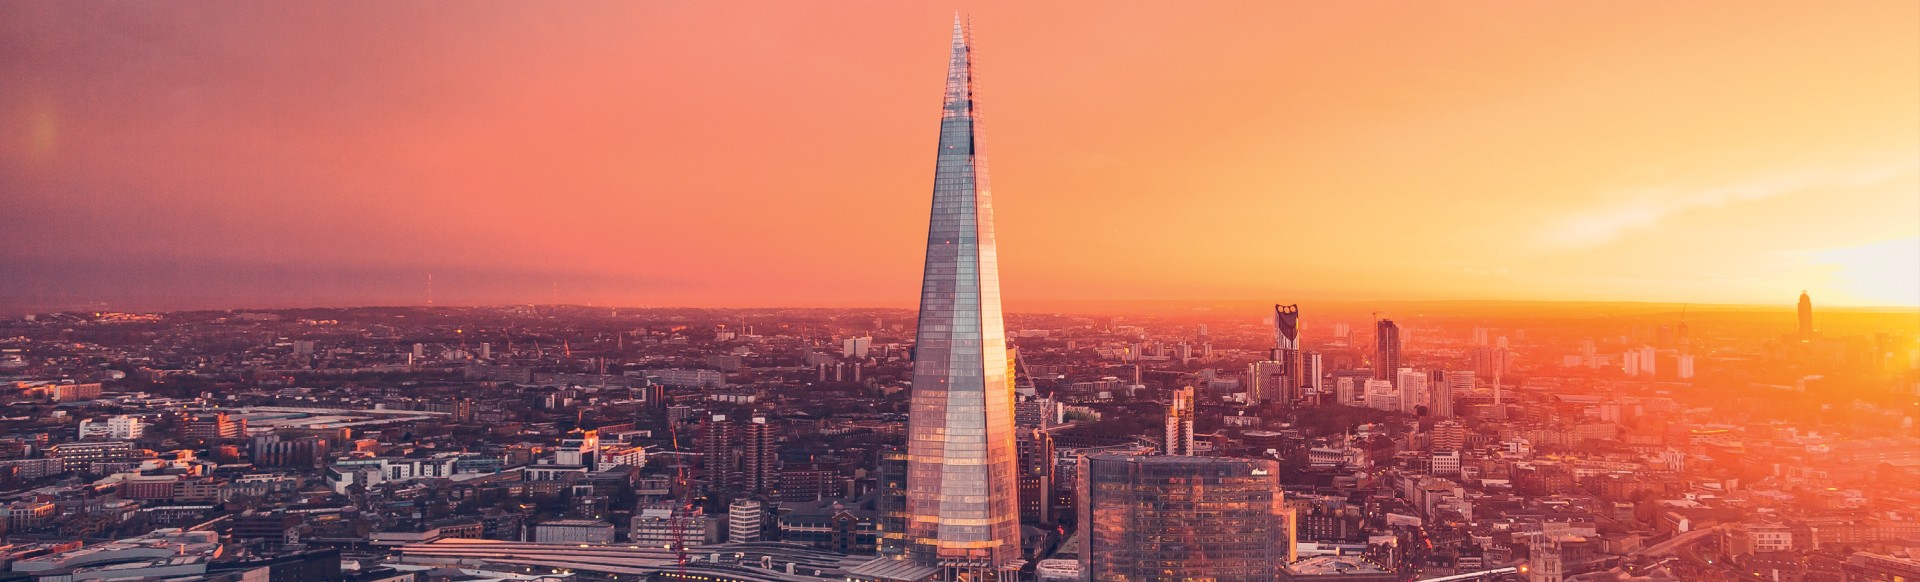 Aerial view of London during a sunset with the Shard at the centre